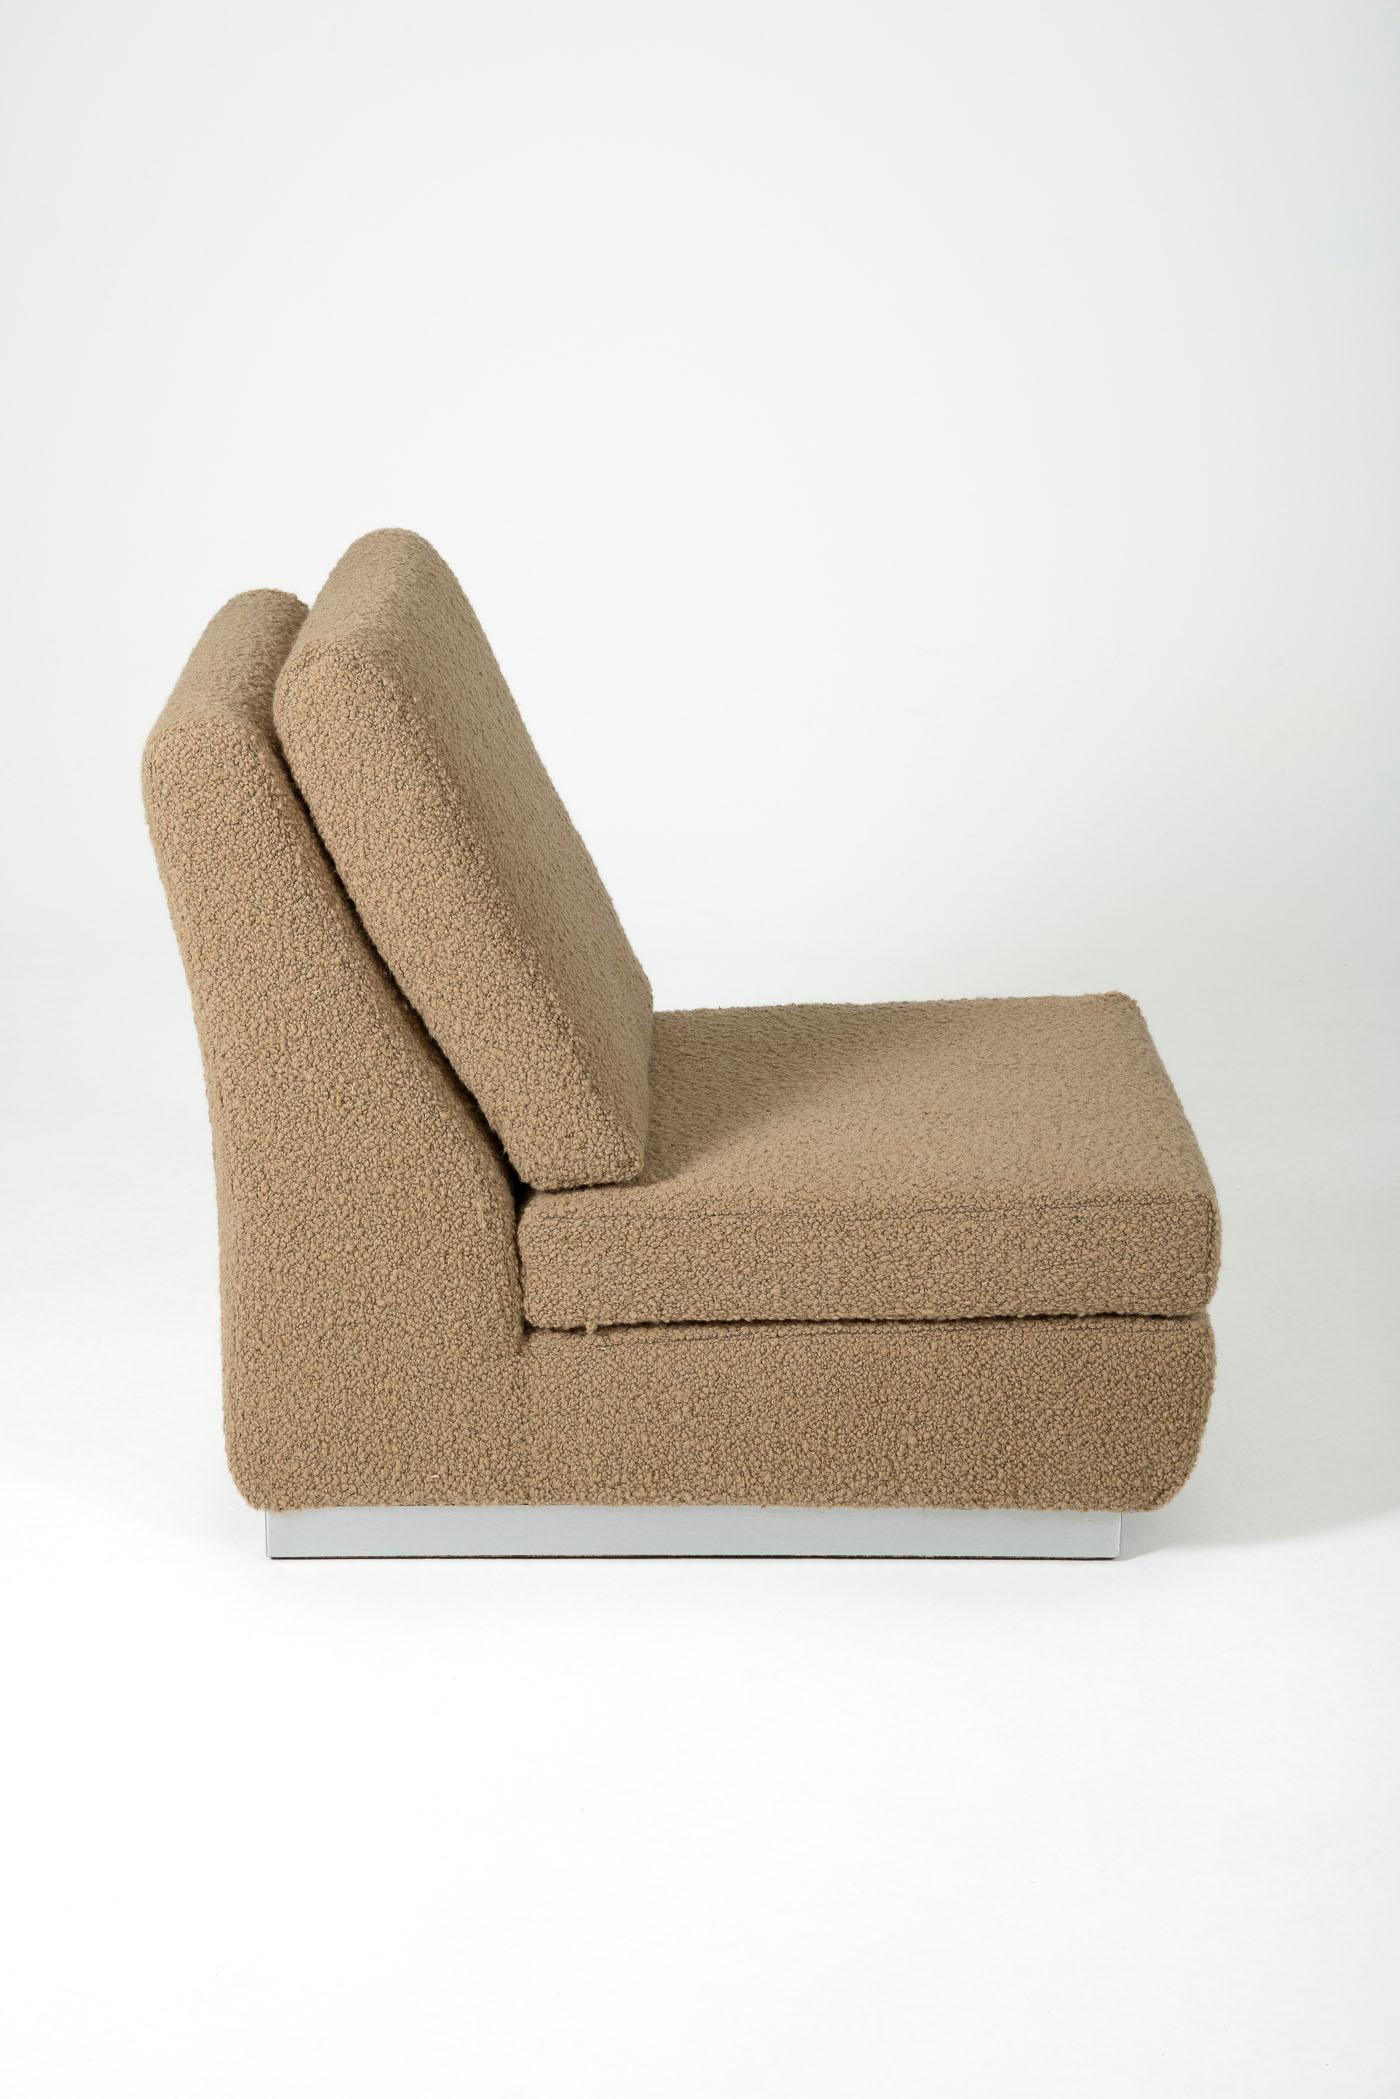 Fabric Low Chair Jacques Charpentier, 1970s For Sale